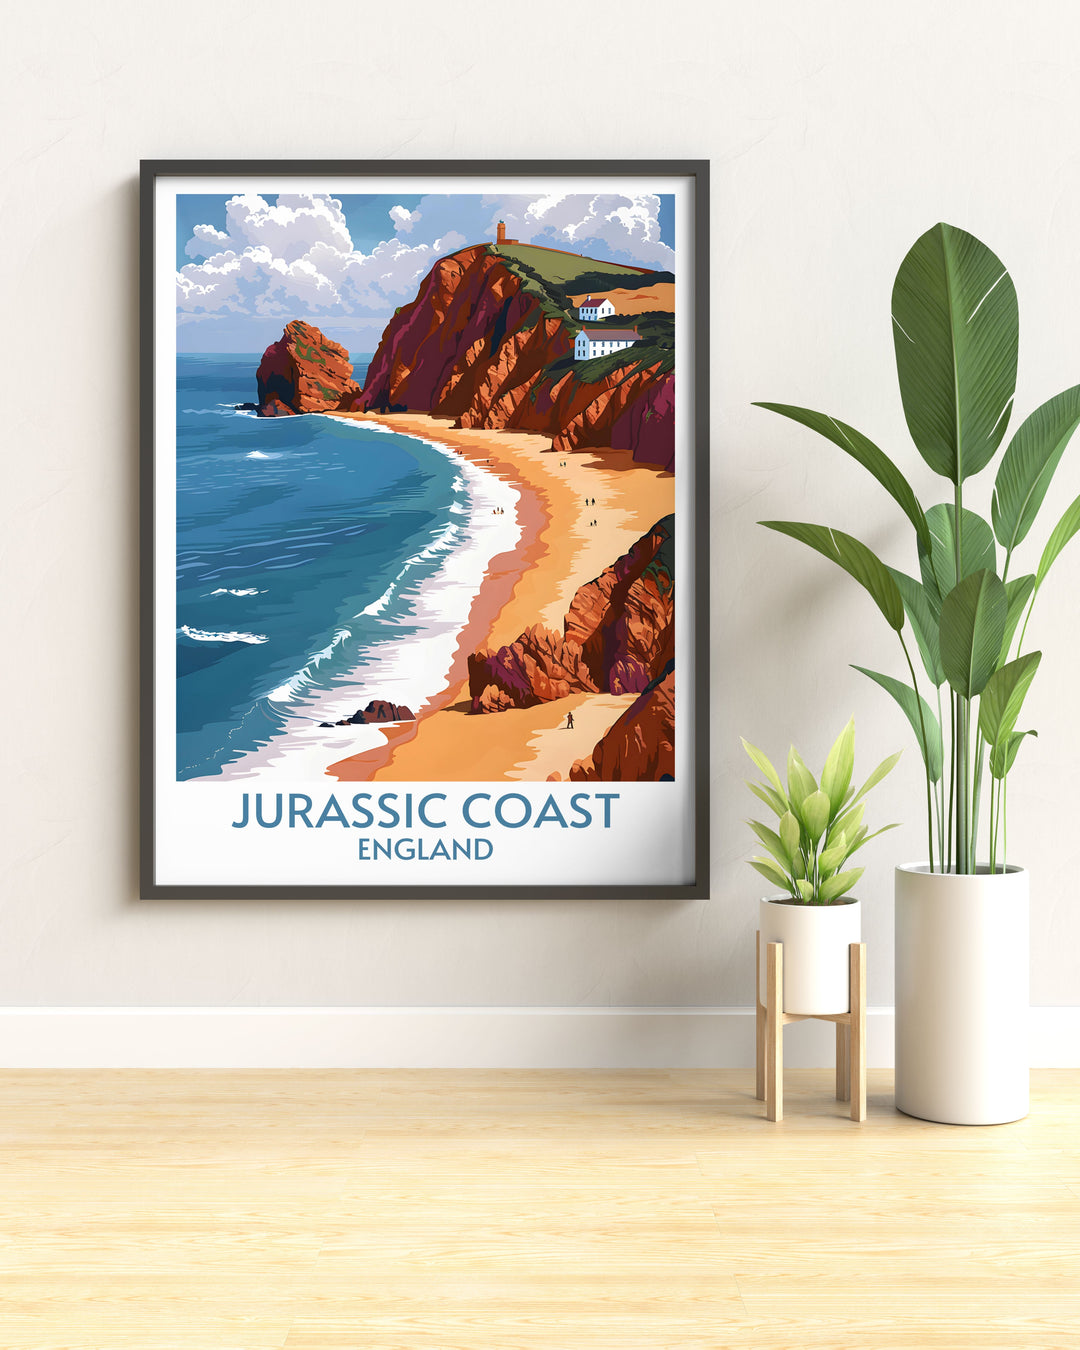 Vibrant Jurassic Coast England canvas art highlighting the ancient cliffs and serene beaches, bringing the beauty of this prehistoric site into your living space.